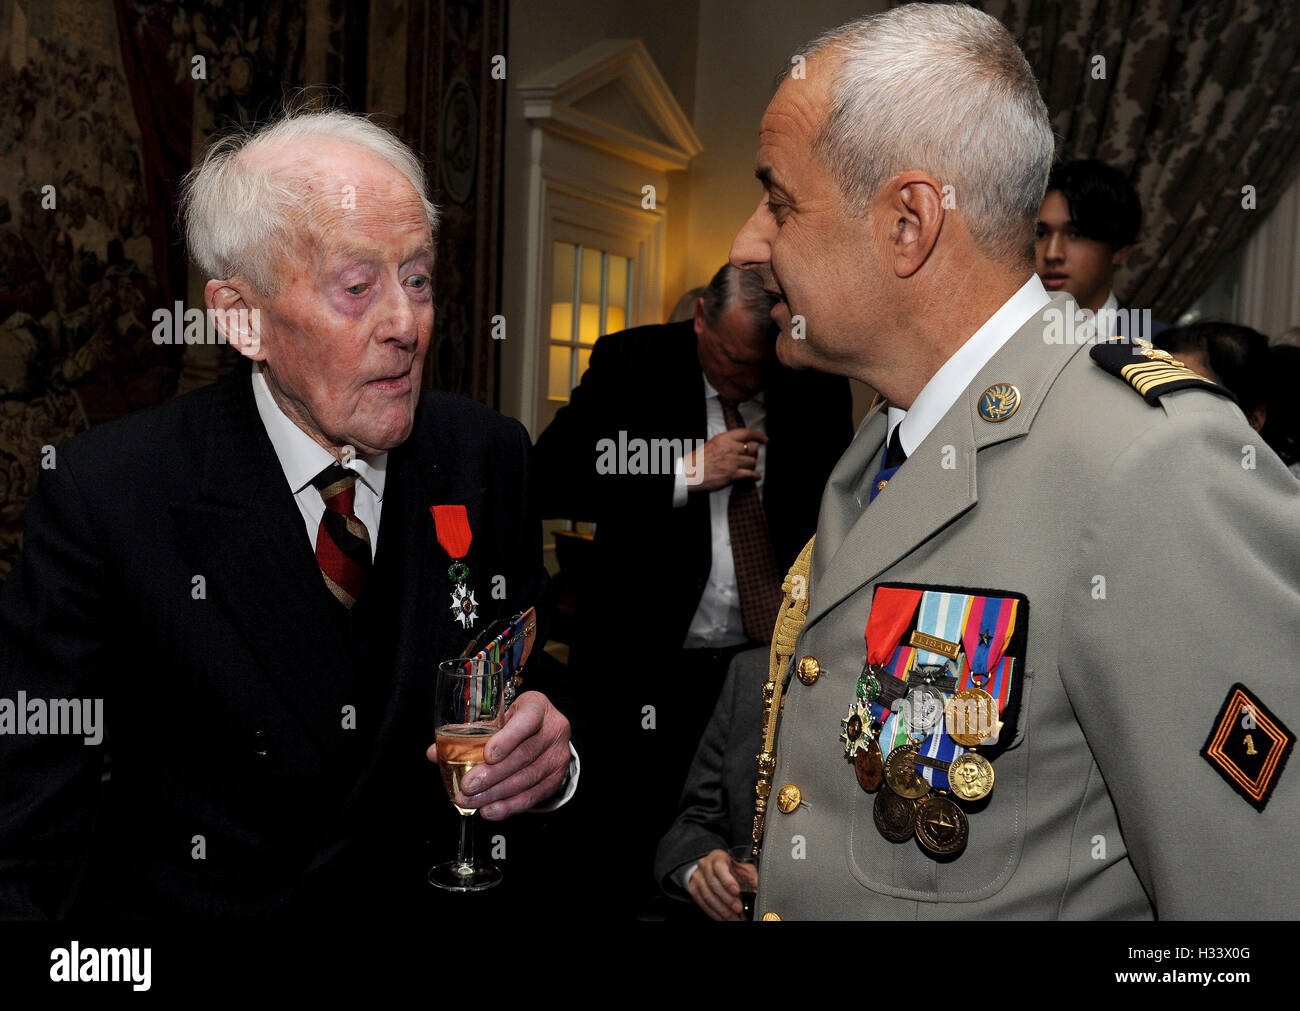 Veteran Humphrey Tottenham, 94, from Wiltshire talks to Colonel De Loustal from the French Parachute Regiment, after he received the Legion d'honneur, France's highest distinction, from the French Ambassador Sylvie Bermann for his role in liberating France during the Second World War, during a ceremony at the Ambassador's residence in Kensington, London. Stock Photo